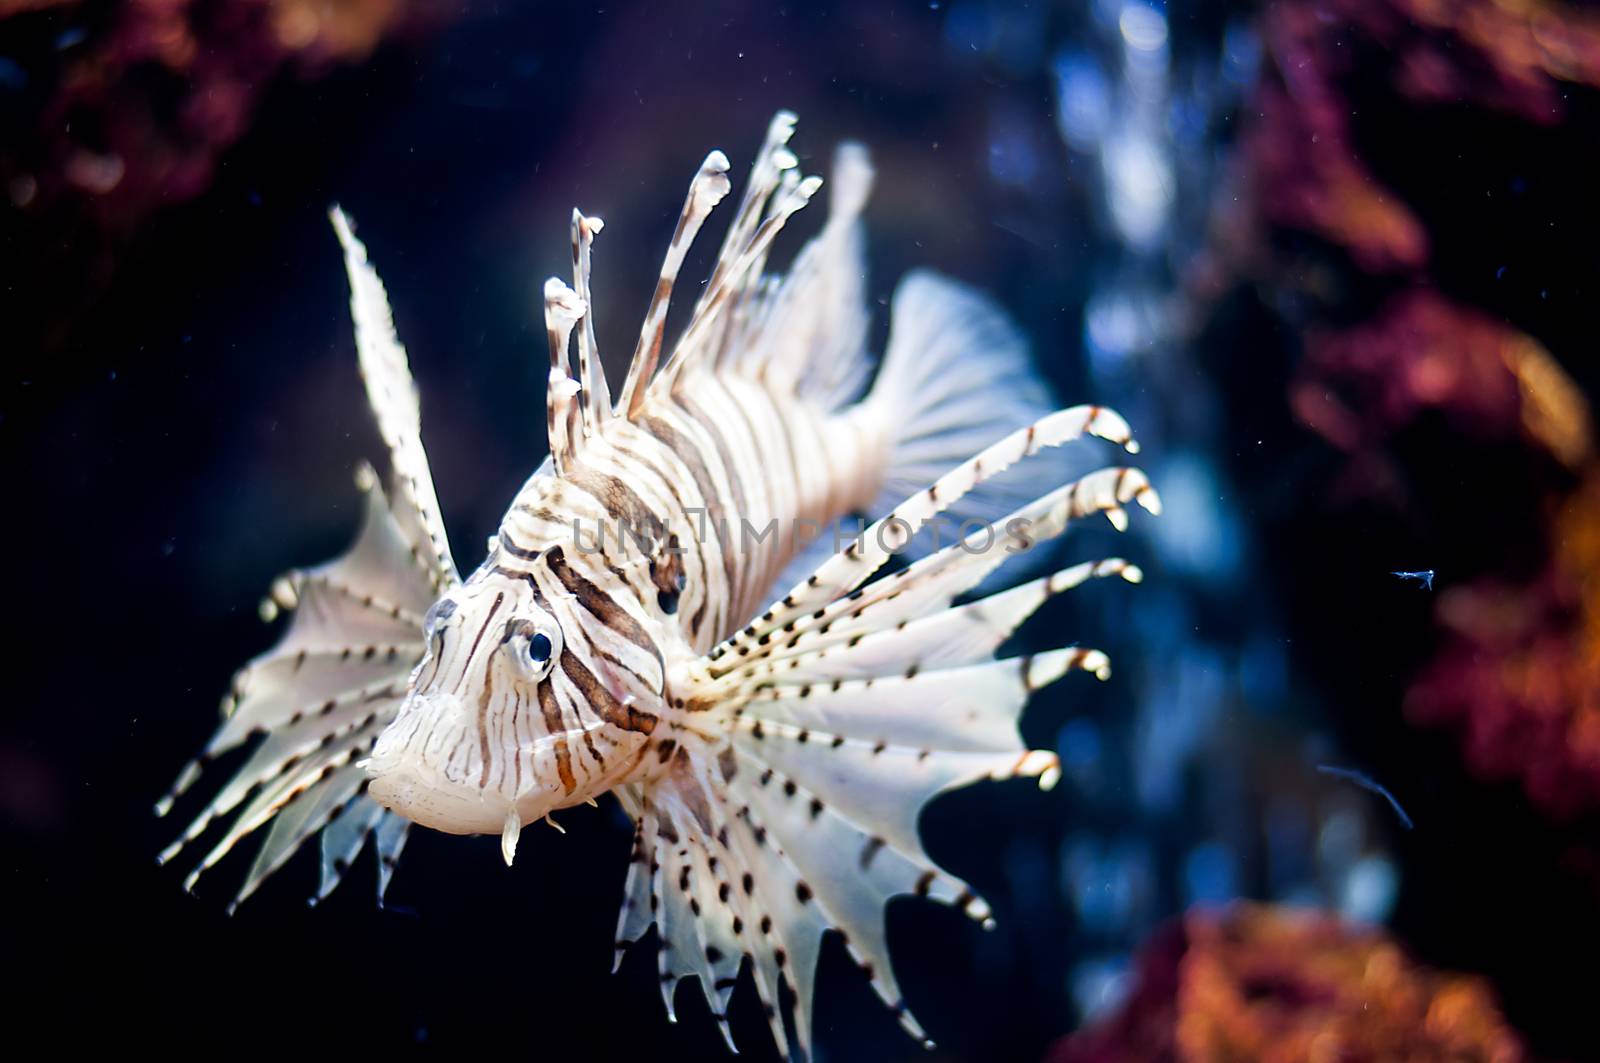 A Lion fish in the fish museum